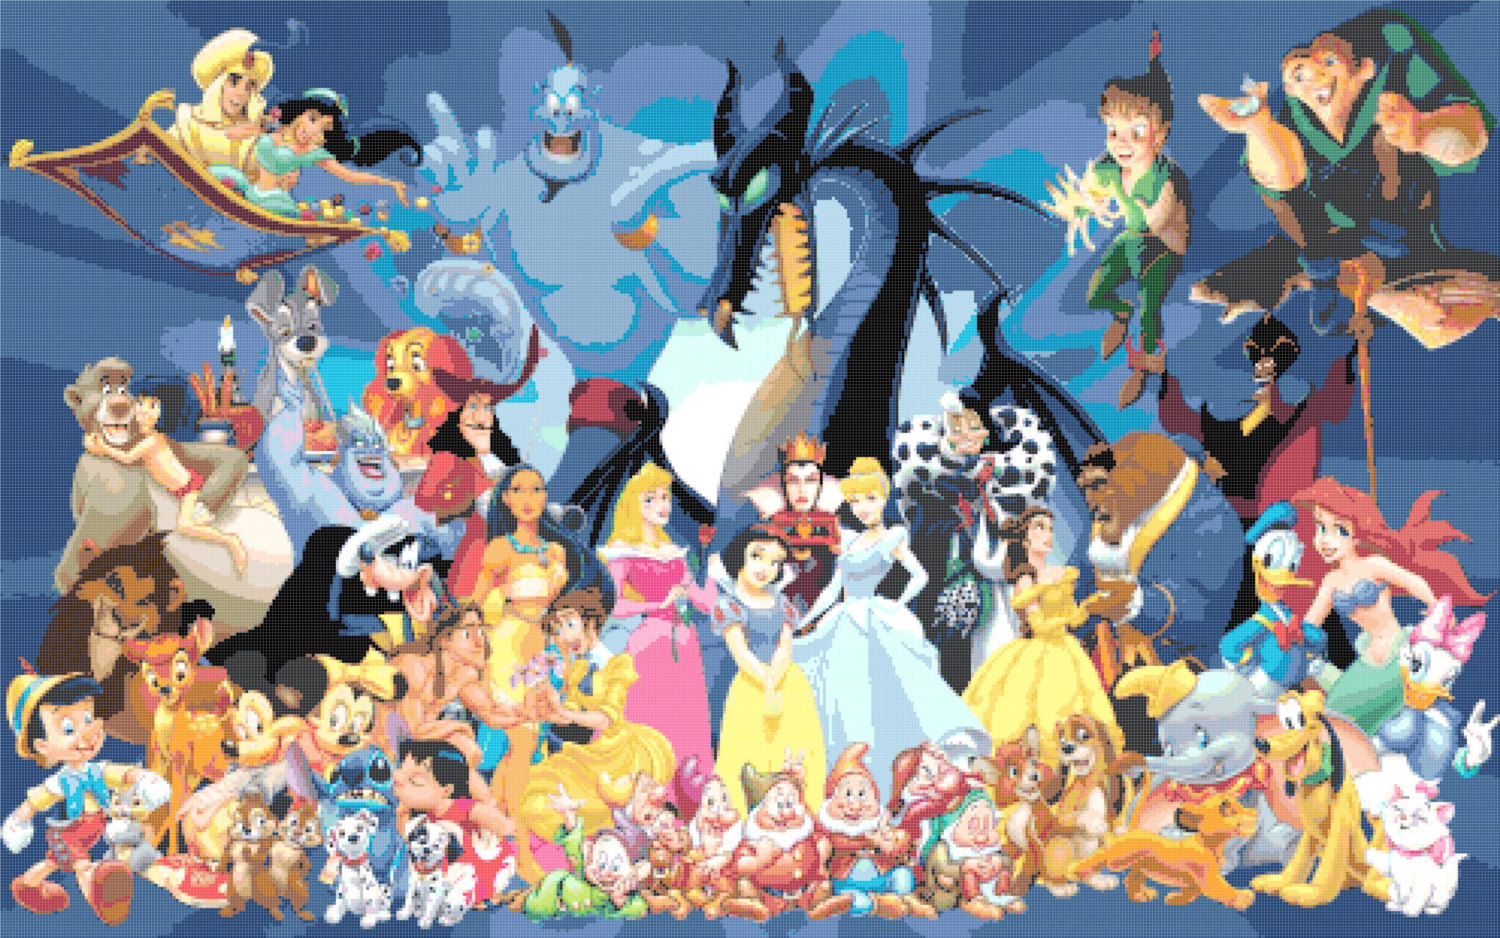 counted cross stitch pattern all characters of disney 496*496 stitches BN008 - $3.99